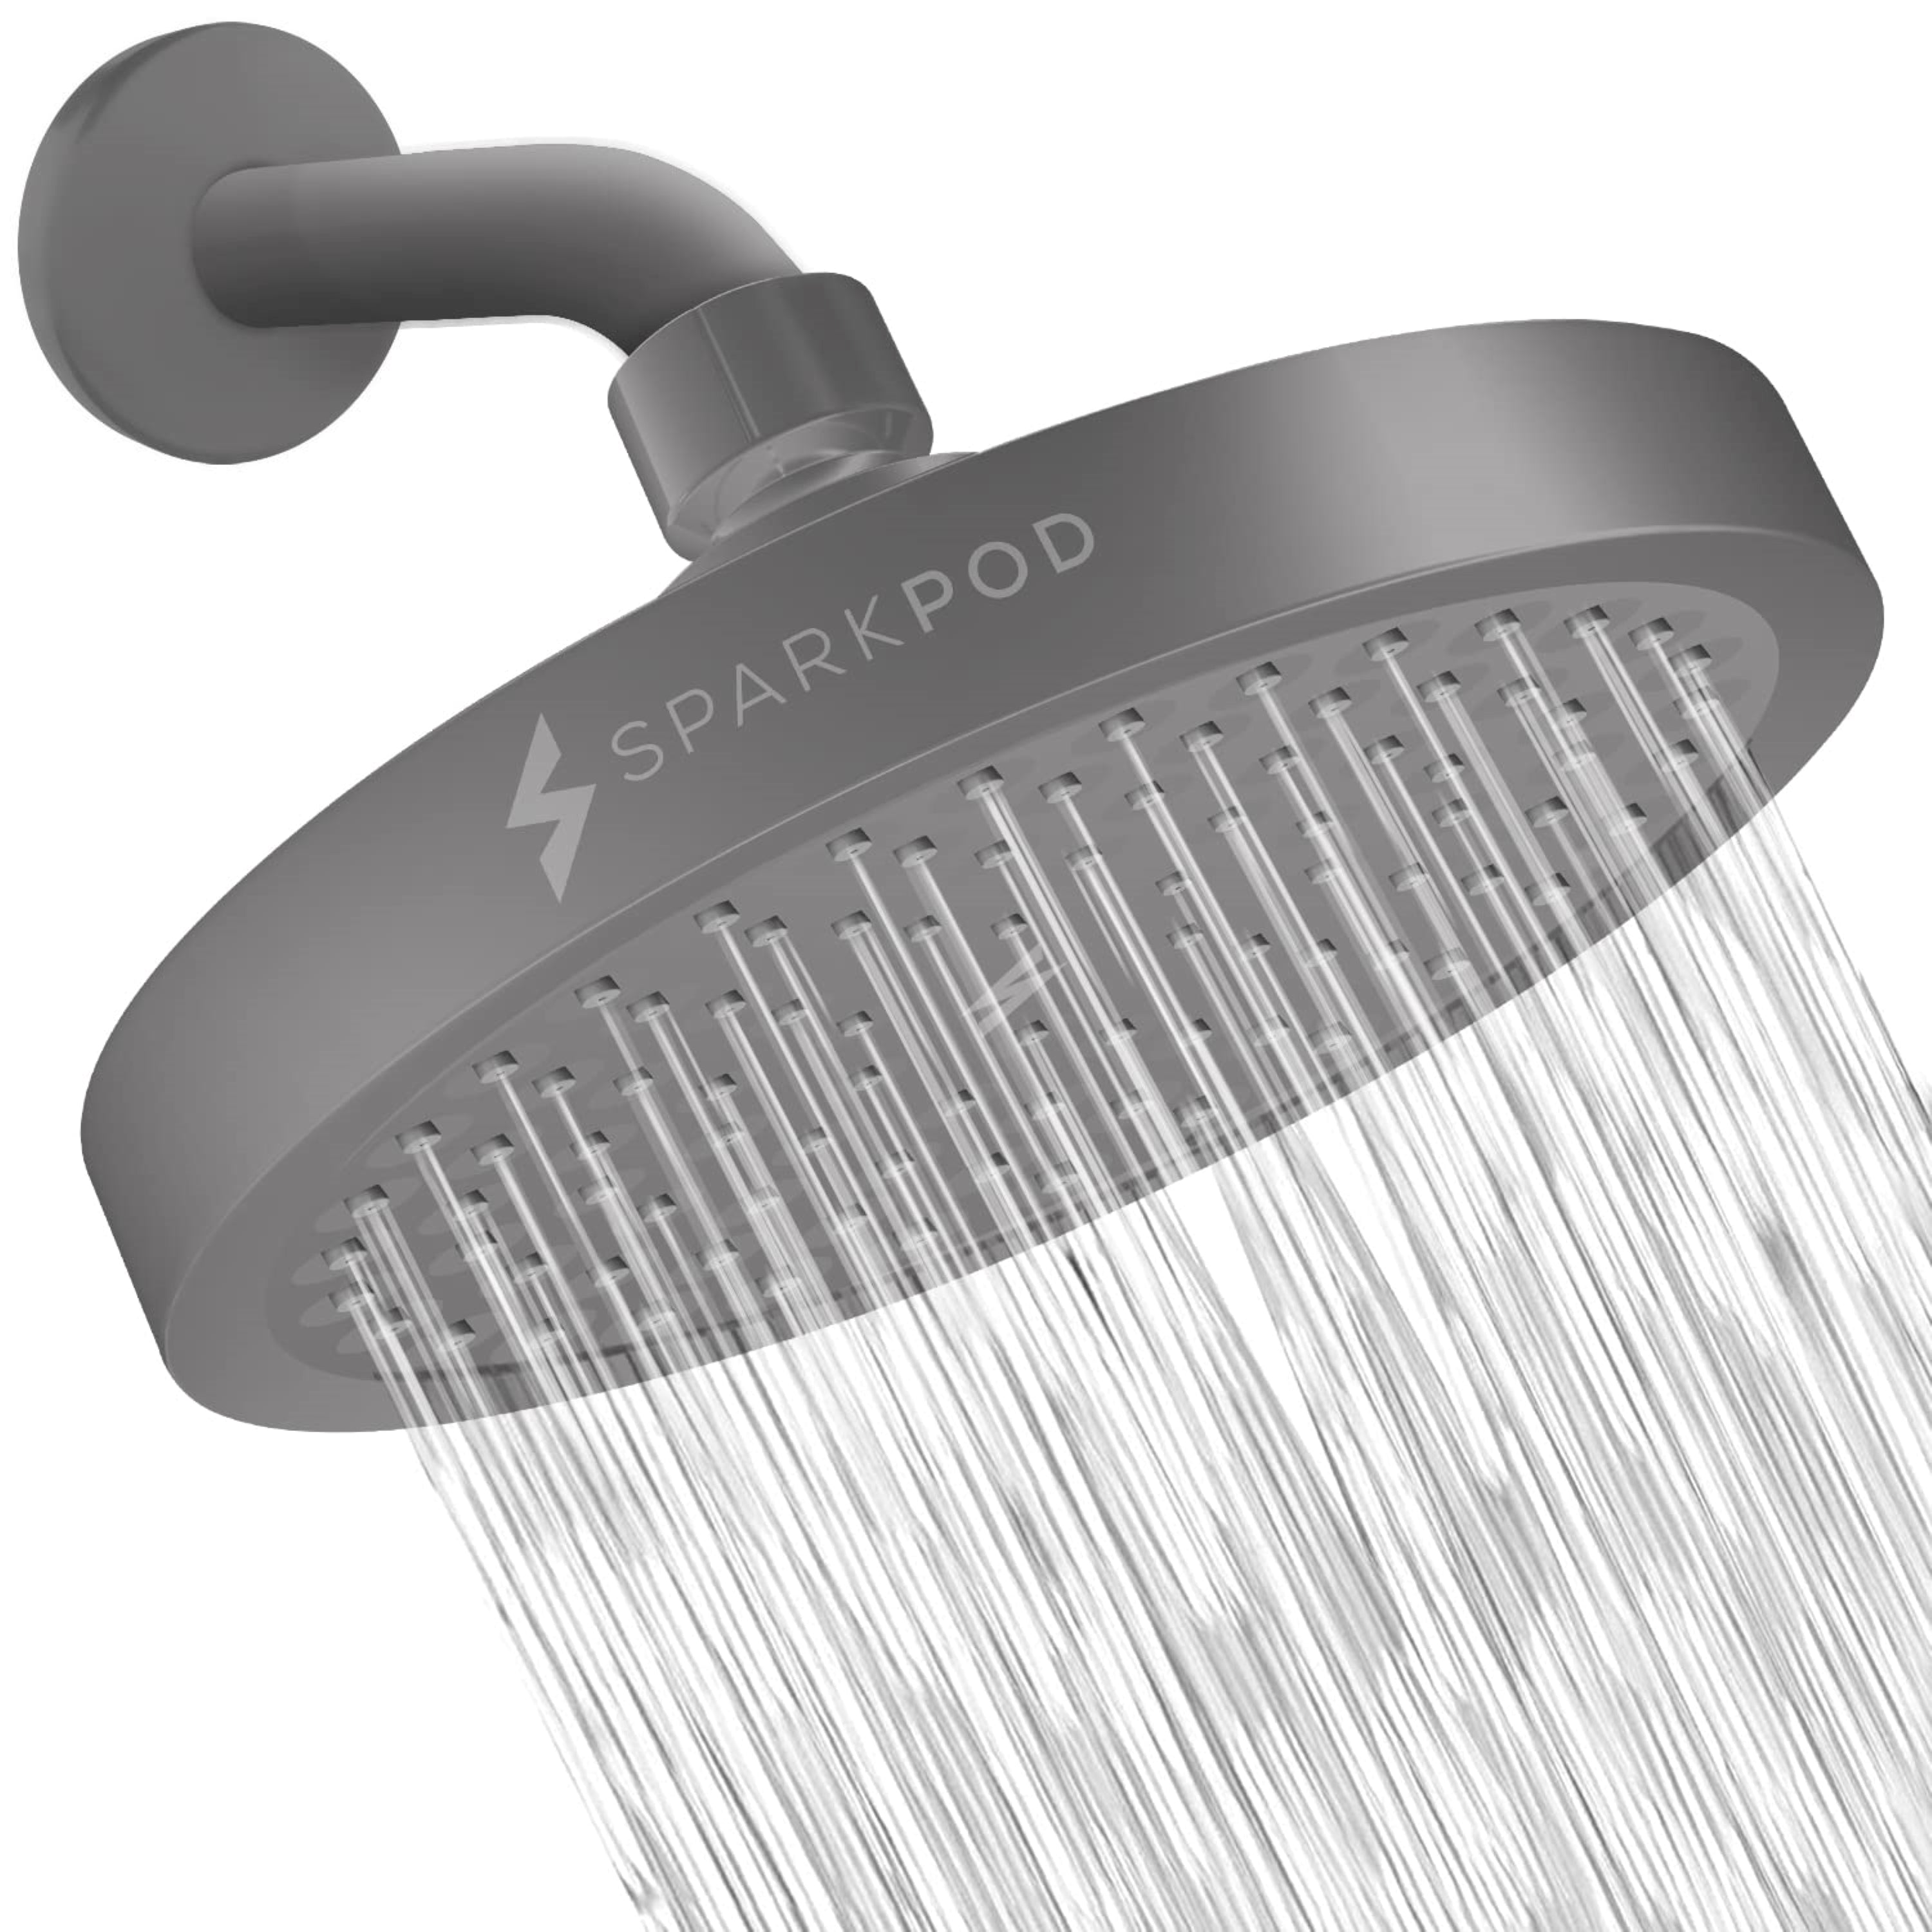 SparkPod Shower Head - High Pressure Rain - Premium Quality Luxury Design -  1-Min Install - Easy Clean Adjustable Replacement for Your Bathroom Shower  Heads (Luxury Polished Chrome, 6 Inch Square) 